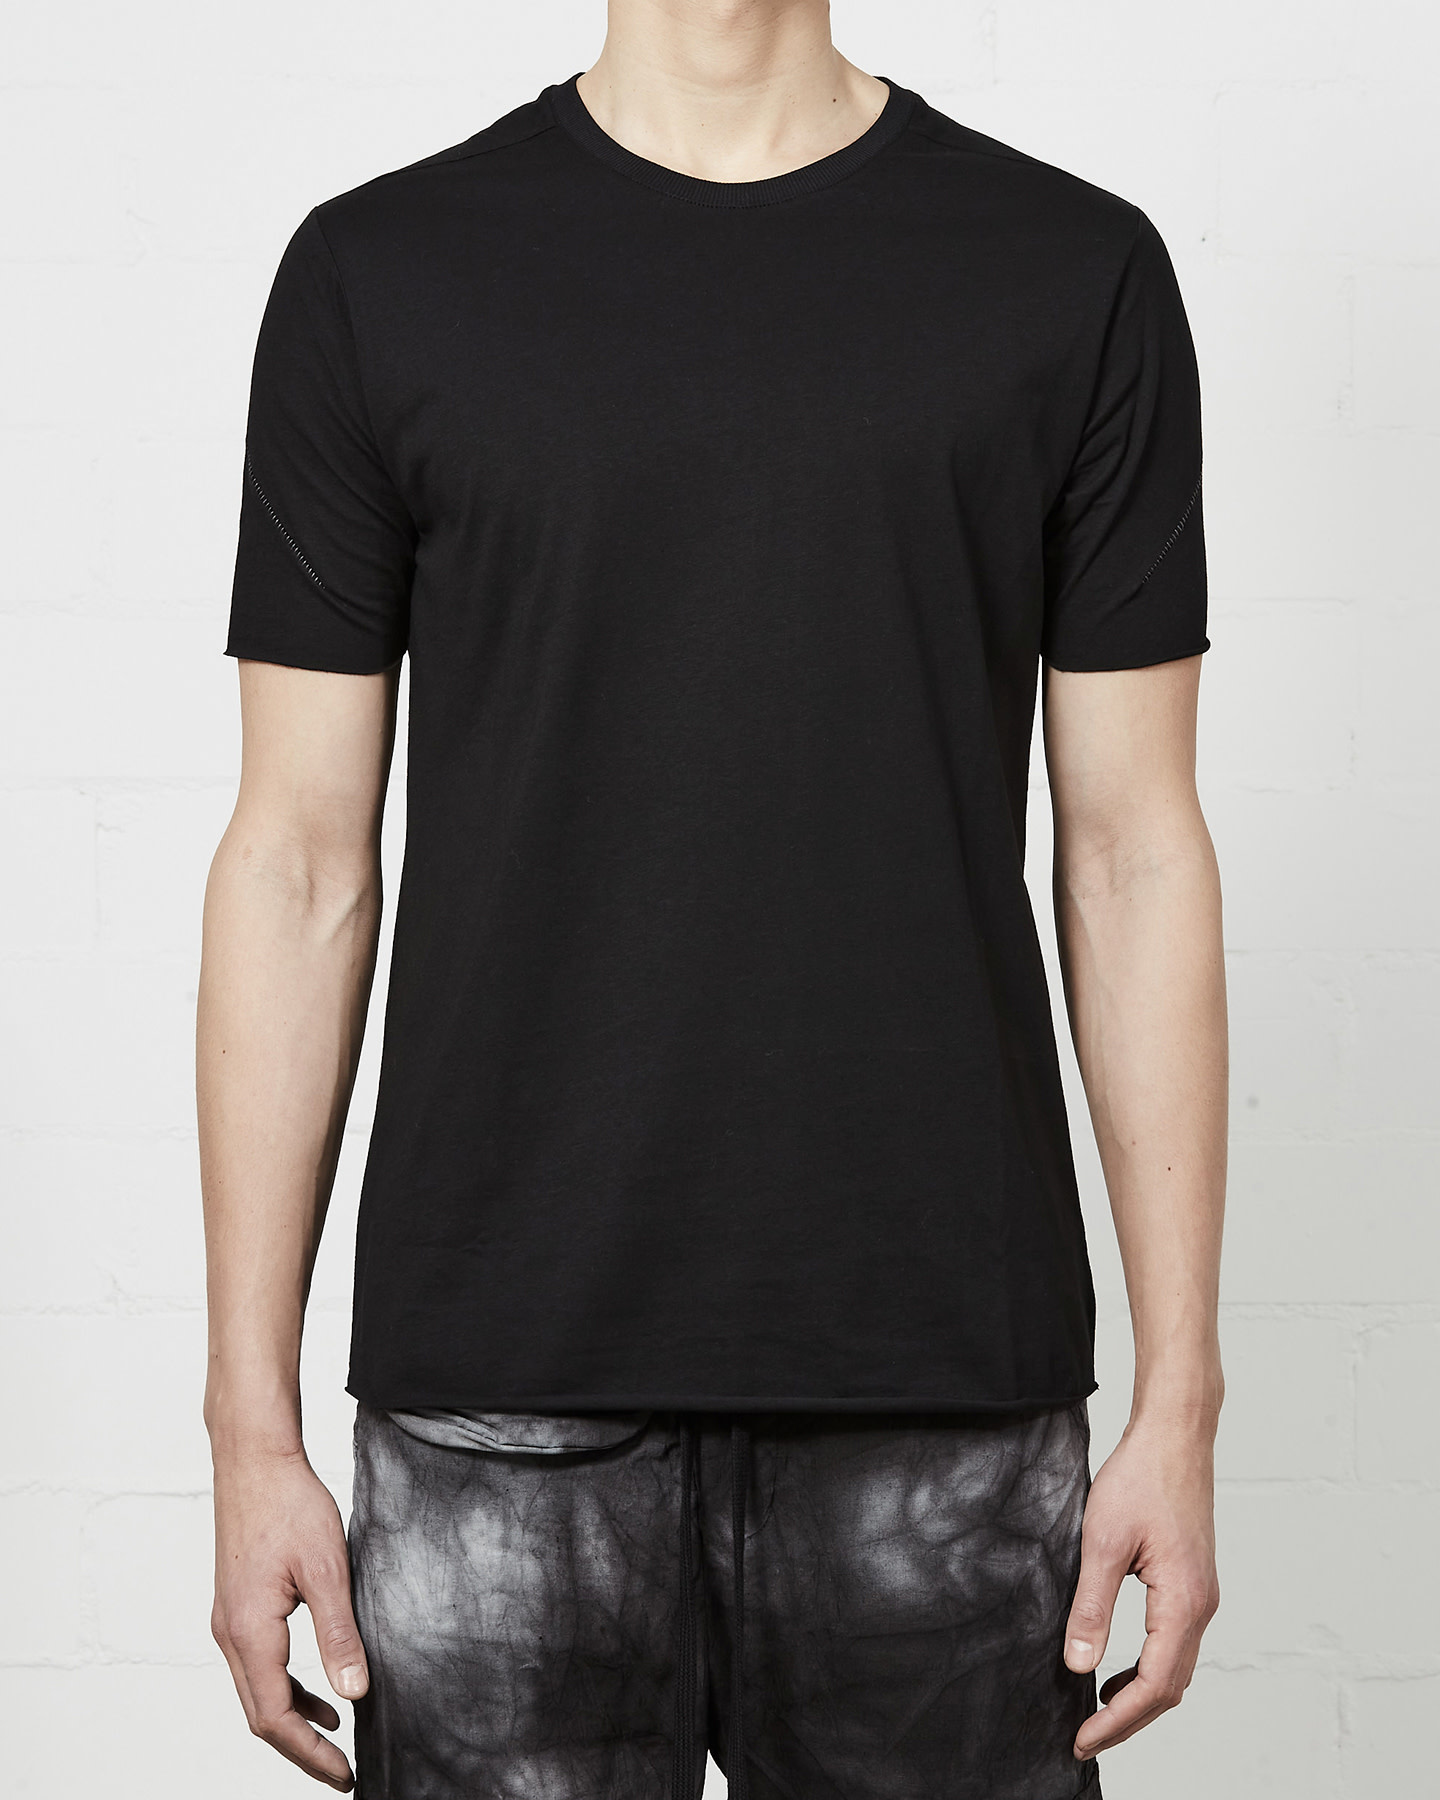 STITCHED BACK FITTED COTTON CREW - BLACK